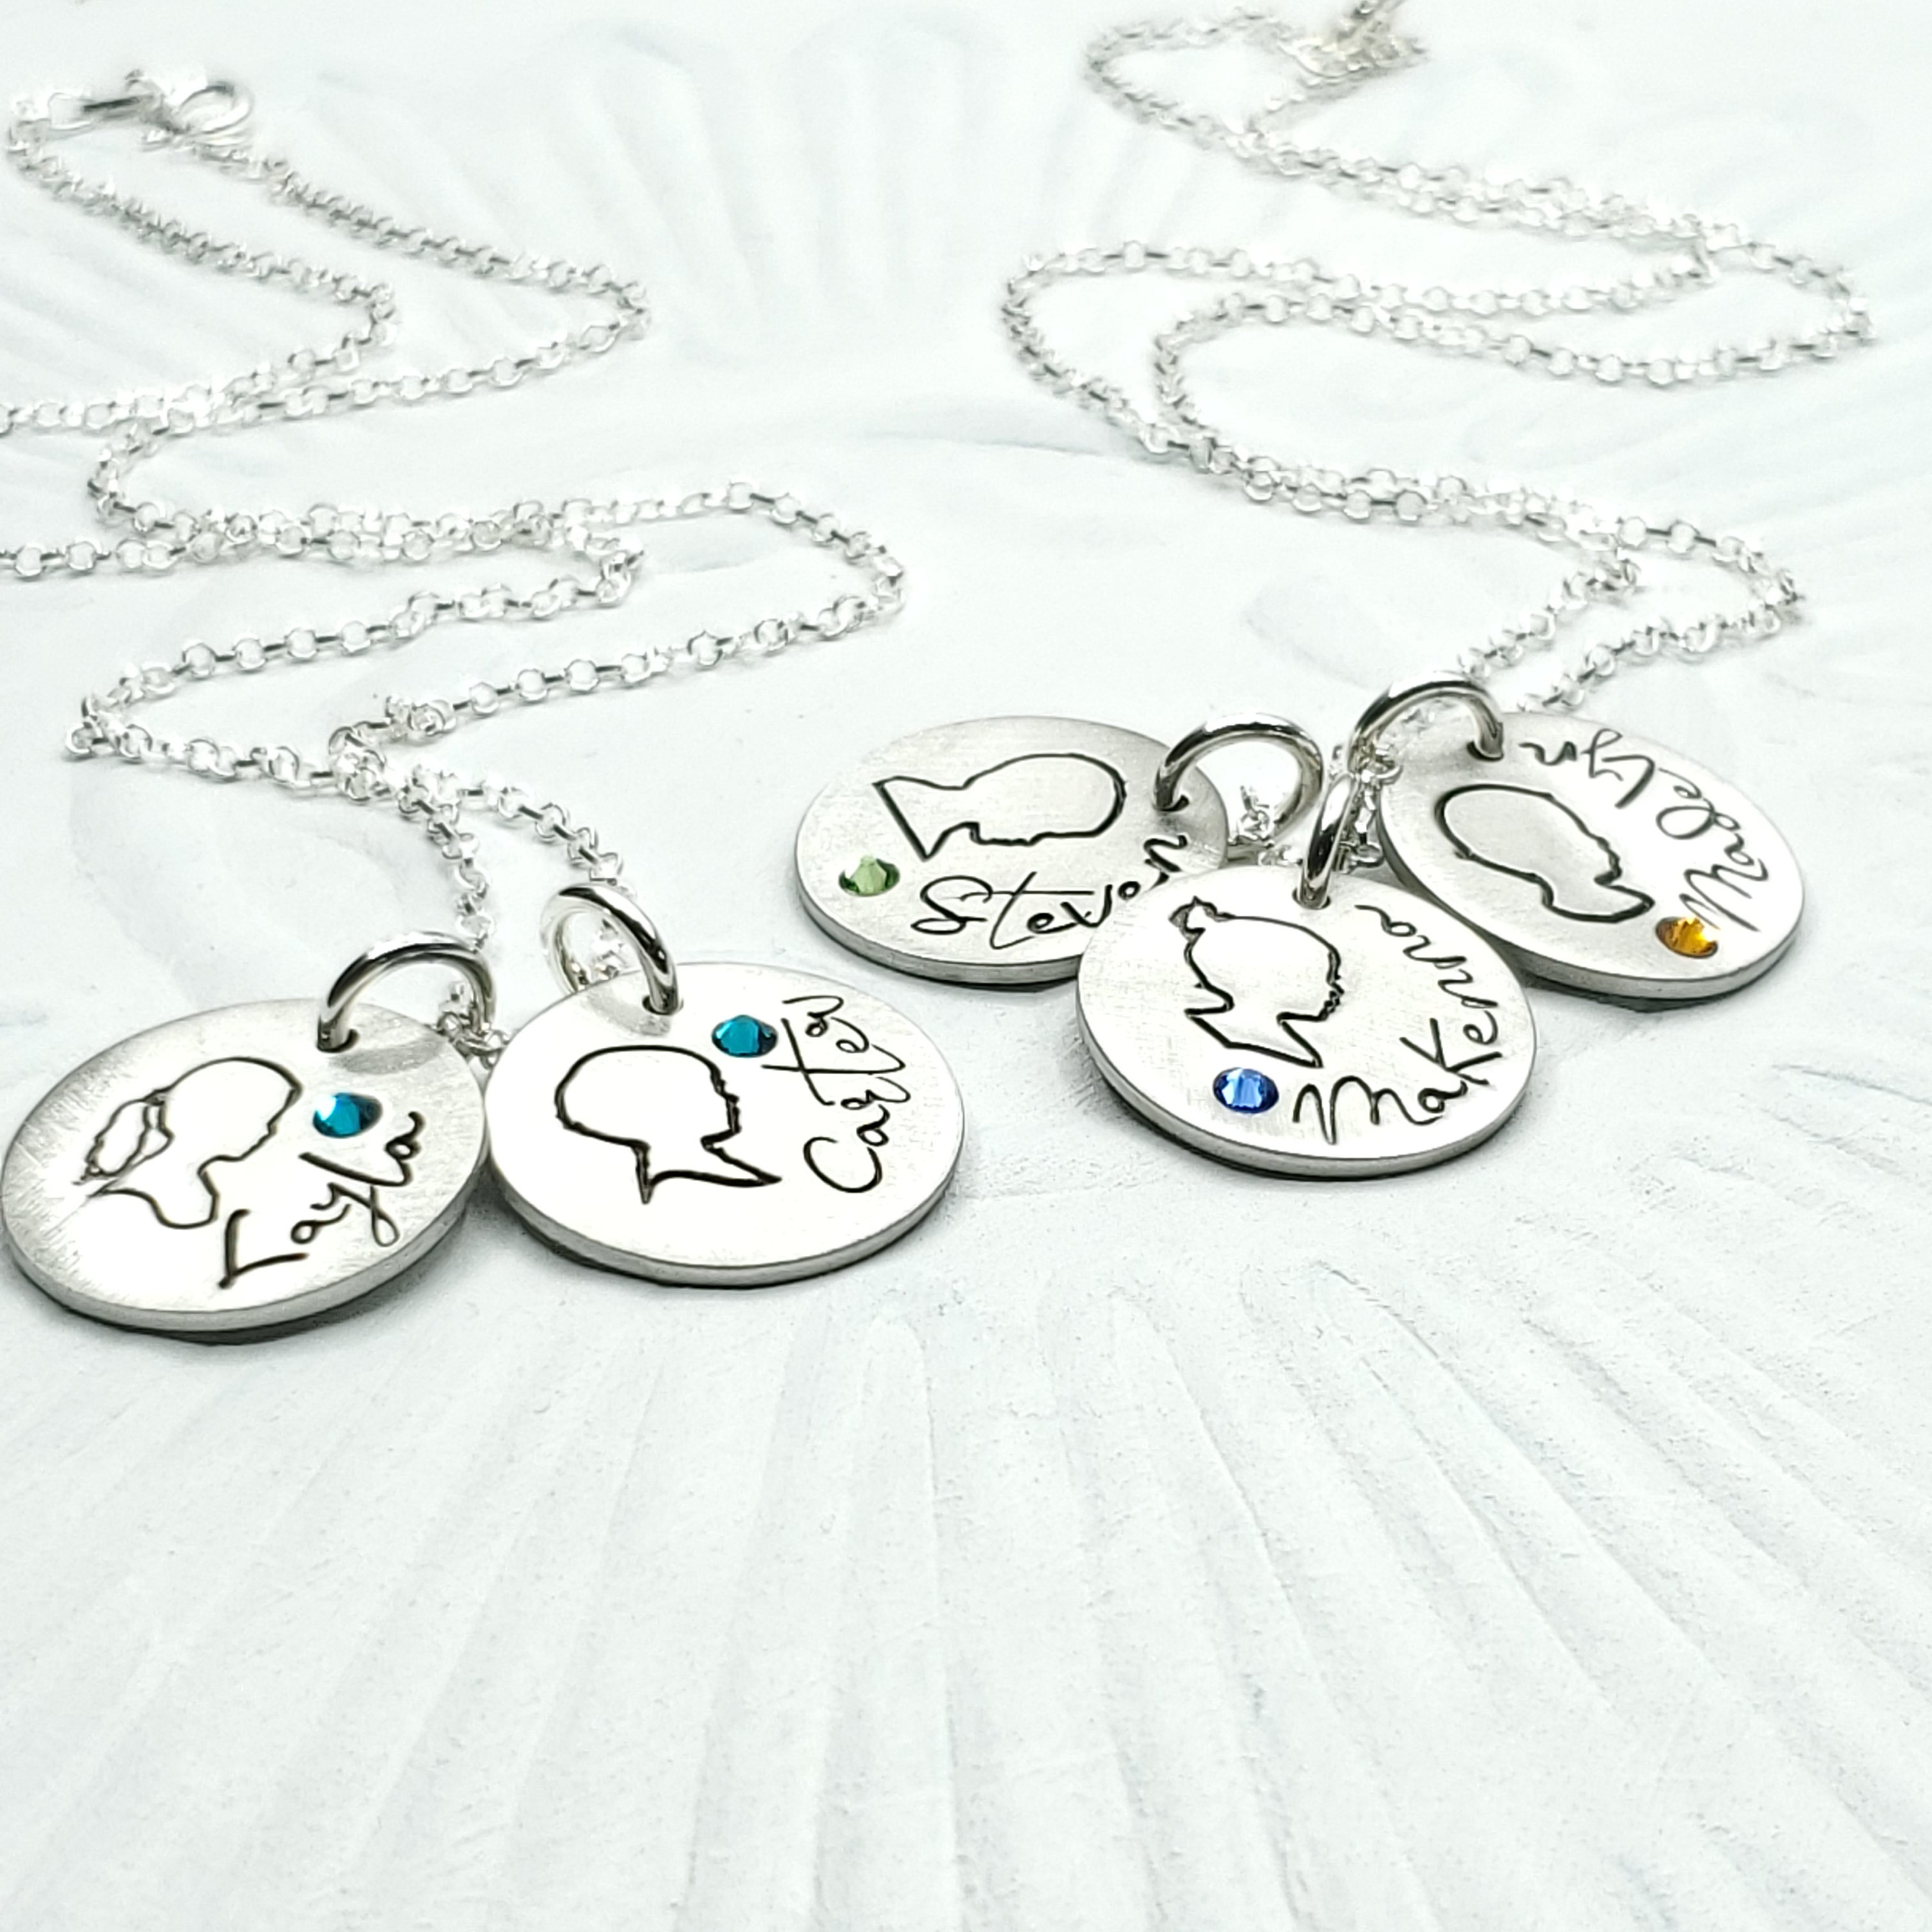 Birthstone Mothers Necklace, Personalized Silhouette and Name Charm Necklace, Gift for Mom, Gift for Grandma